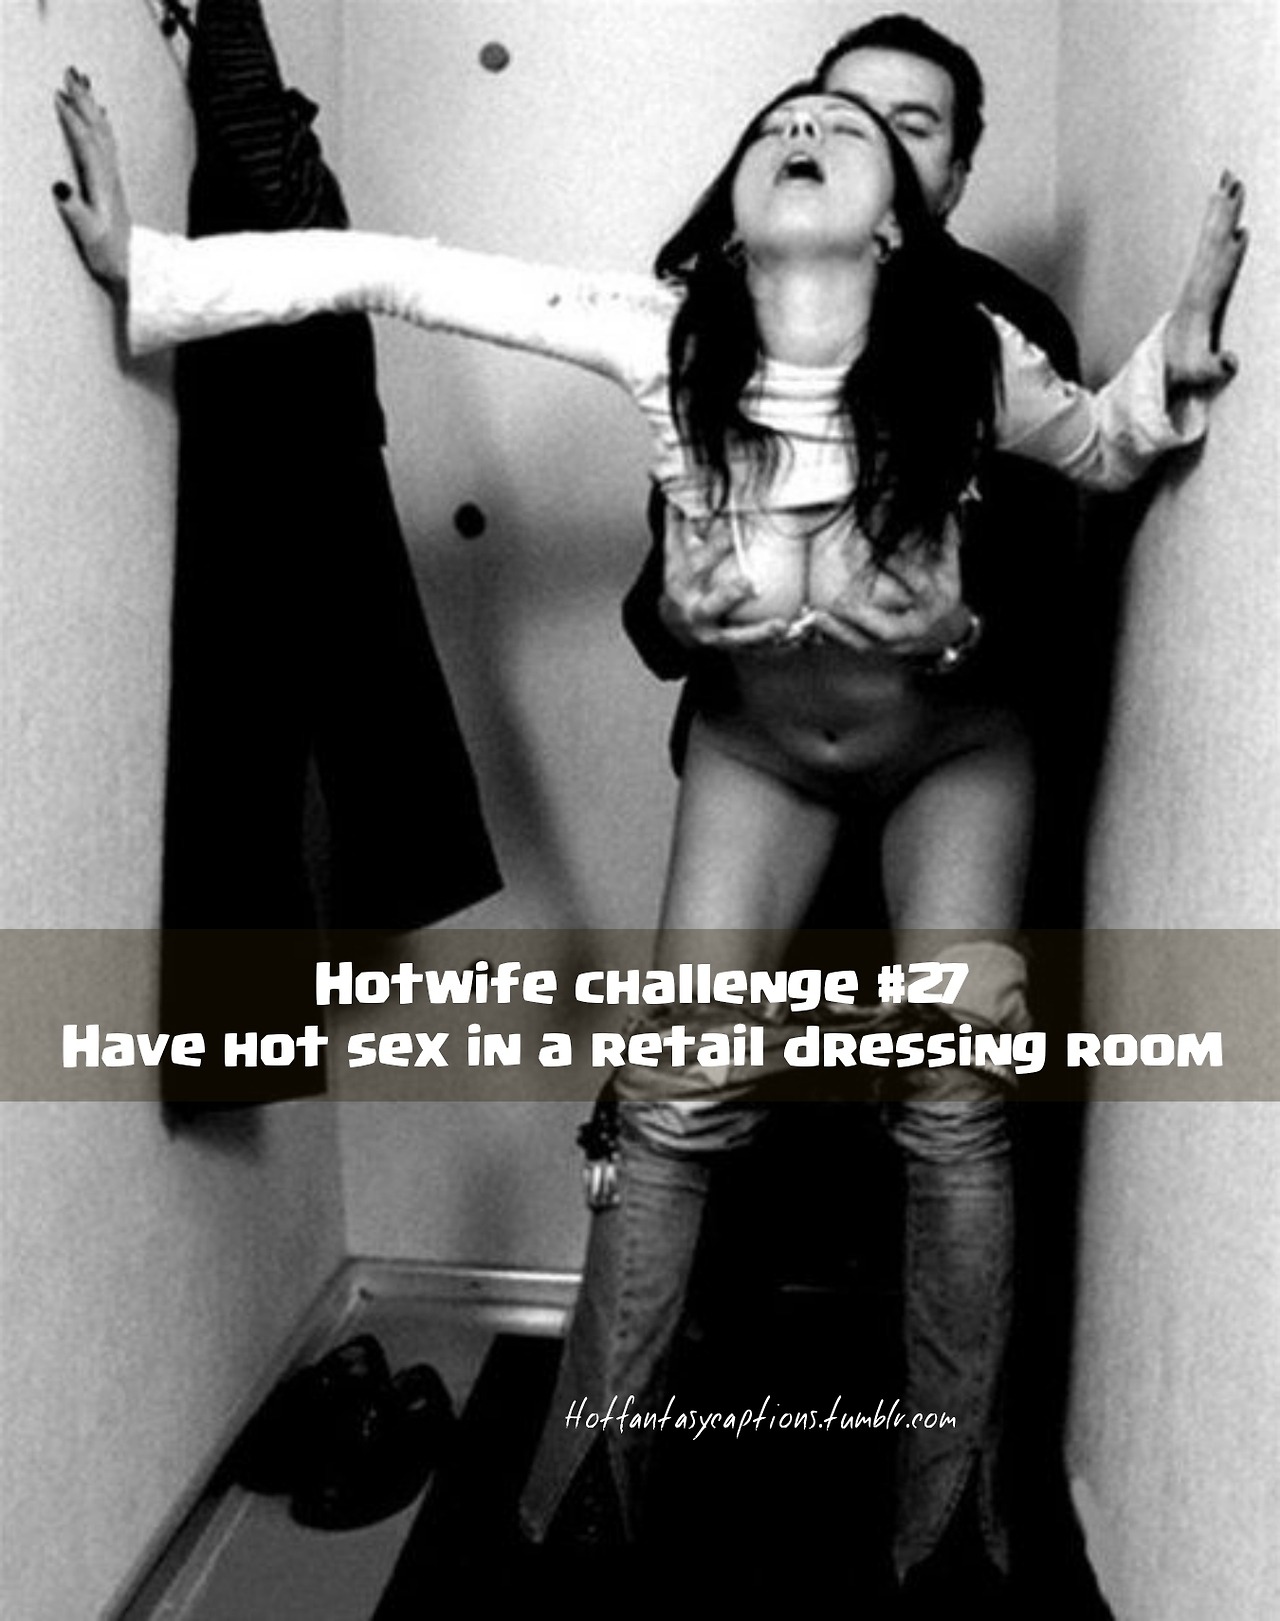 Hotwife challenge #27 - Have hot sex in a dressing room image pic